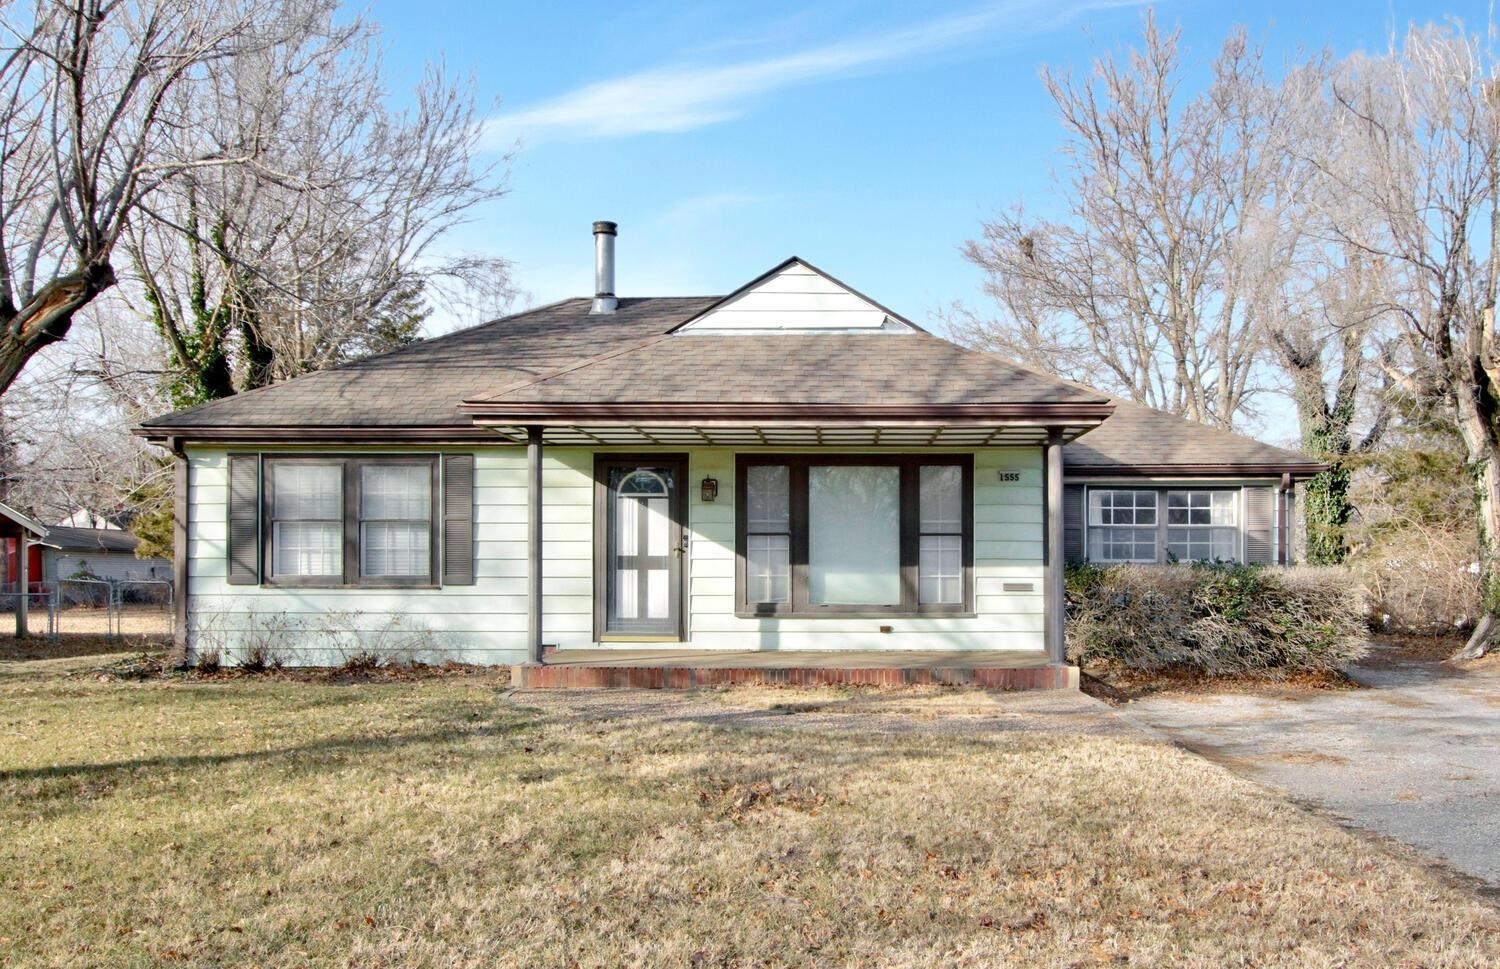 This 2 owner home has been loved by its family since the 1950s and is ready for new owners. This is 